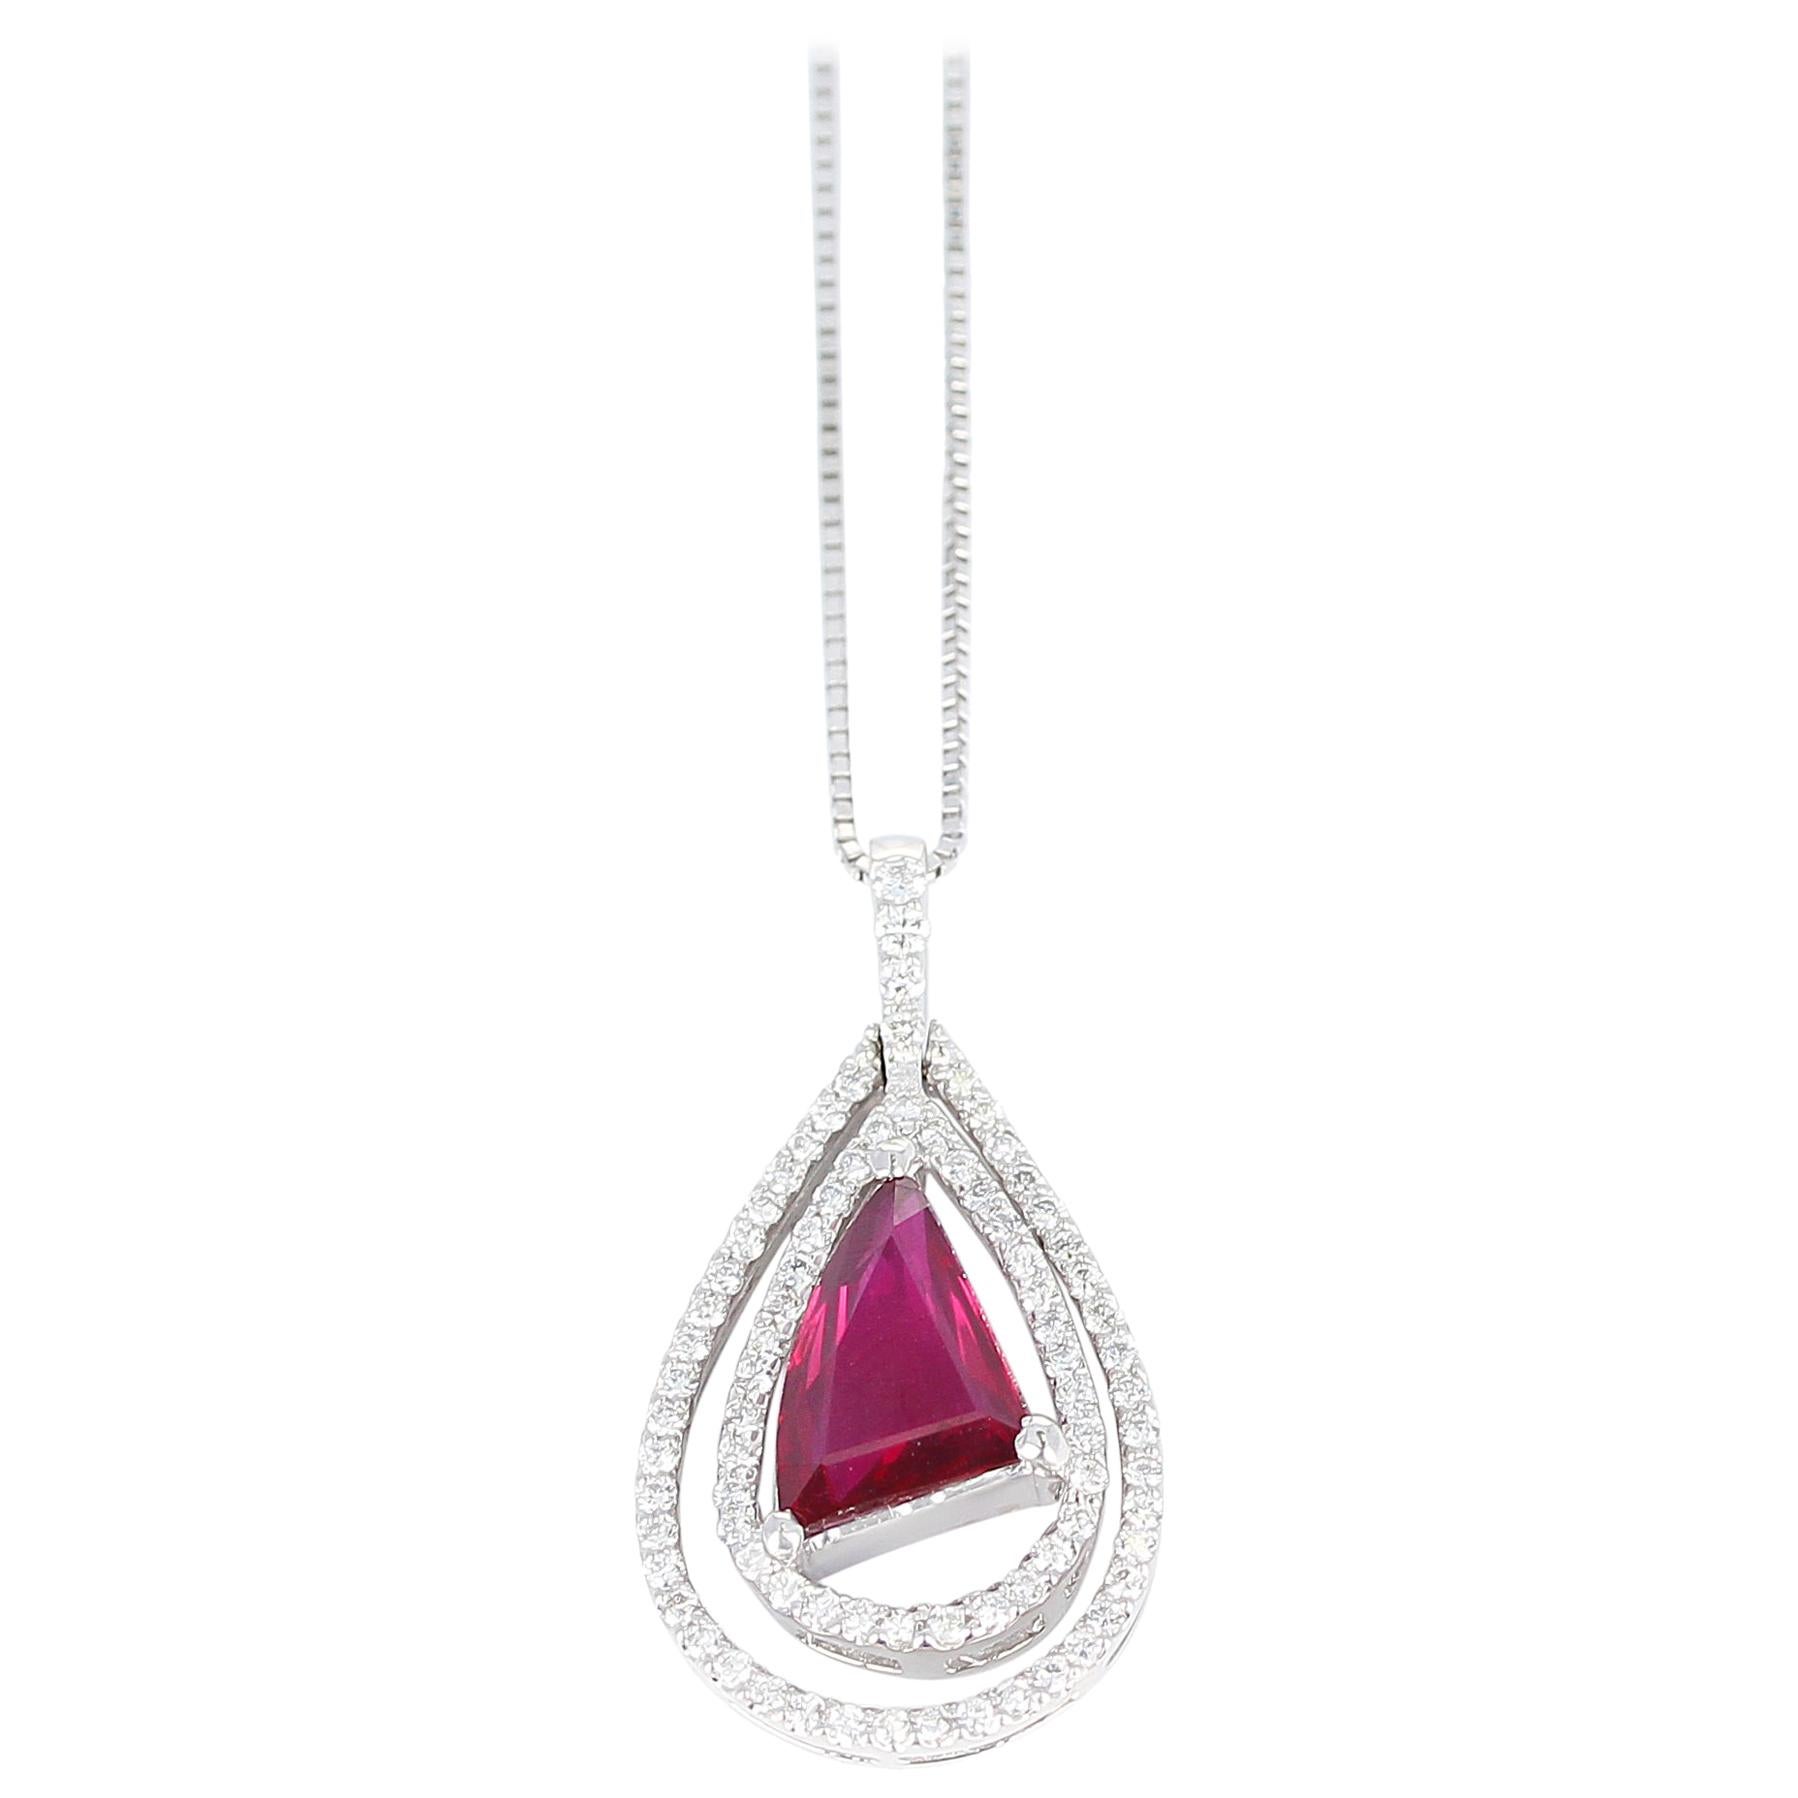 GRS Certified 2.03 Carat No Heat Vivid Red Mozambique Ruby and Diamond Pendant For Sale